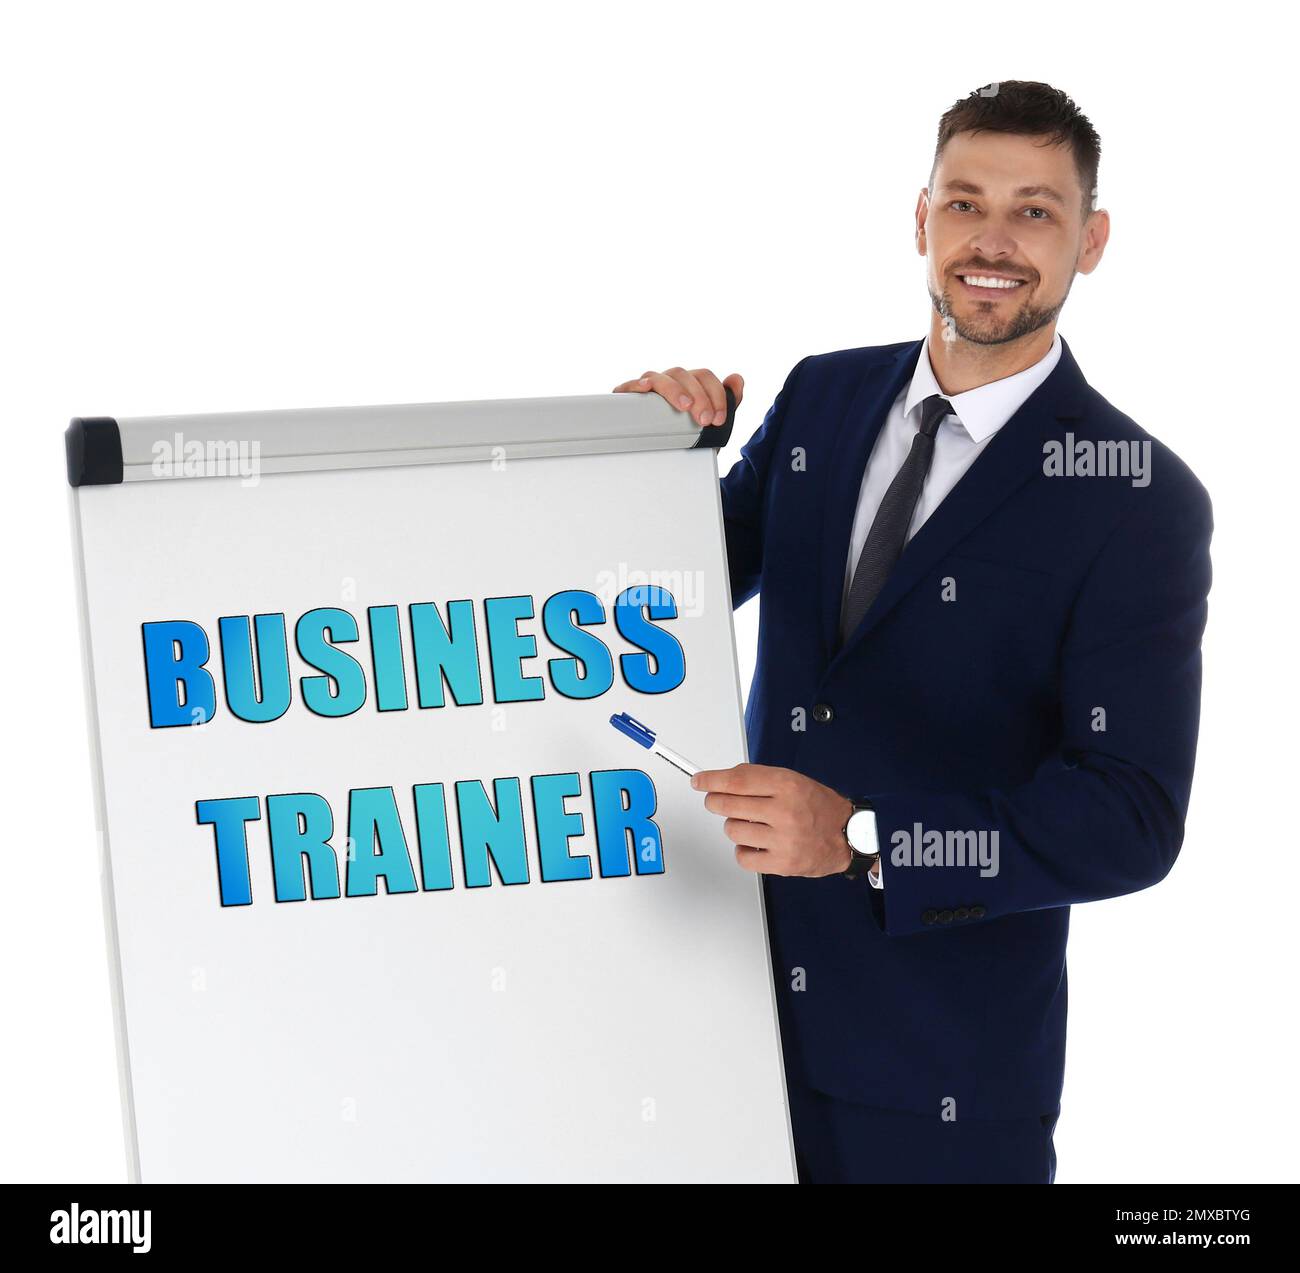 Professional business trainer near flip chart board on white background Stock Photo